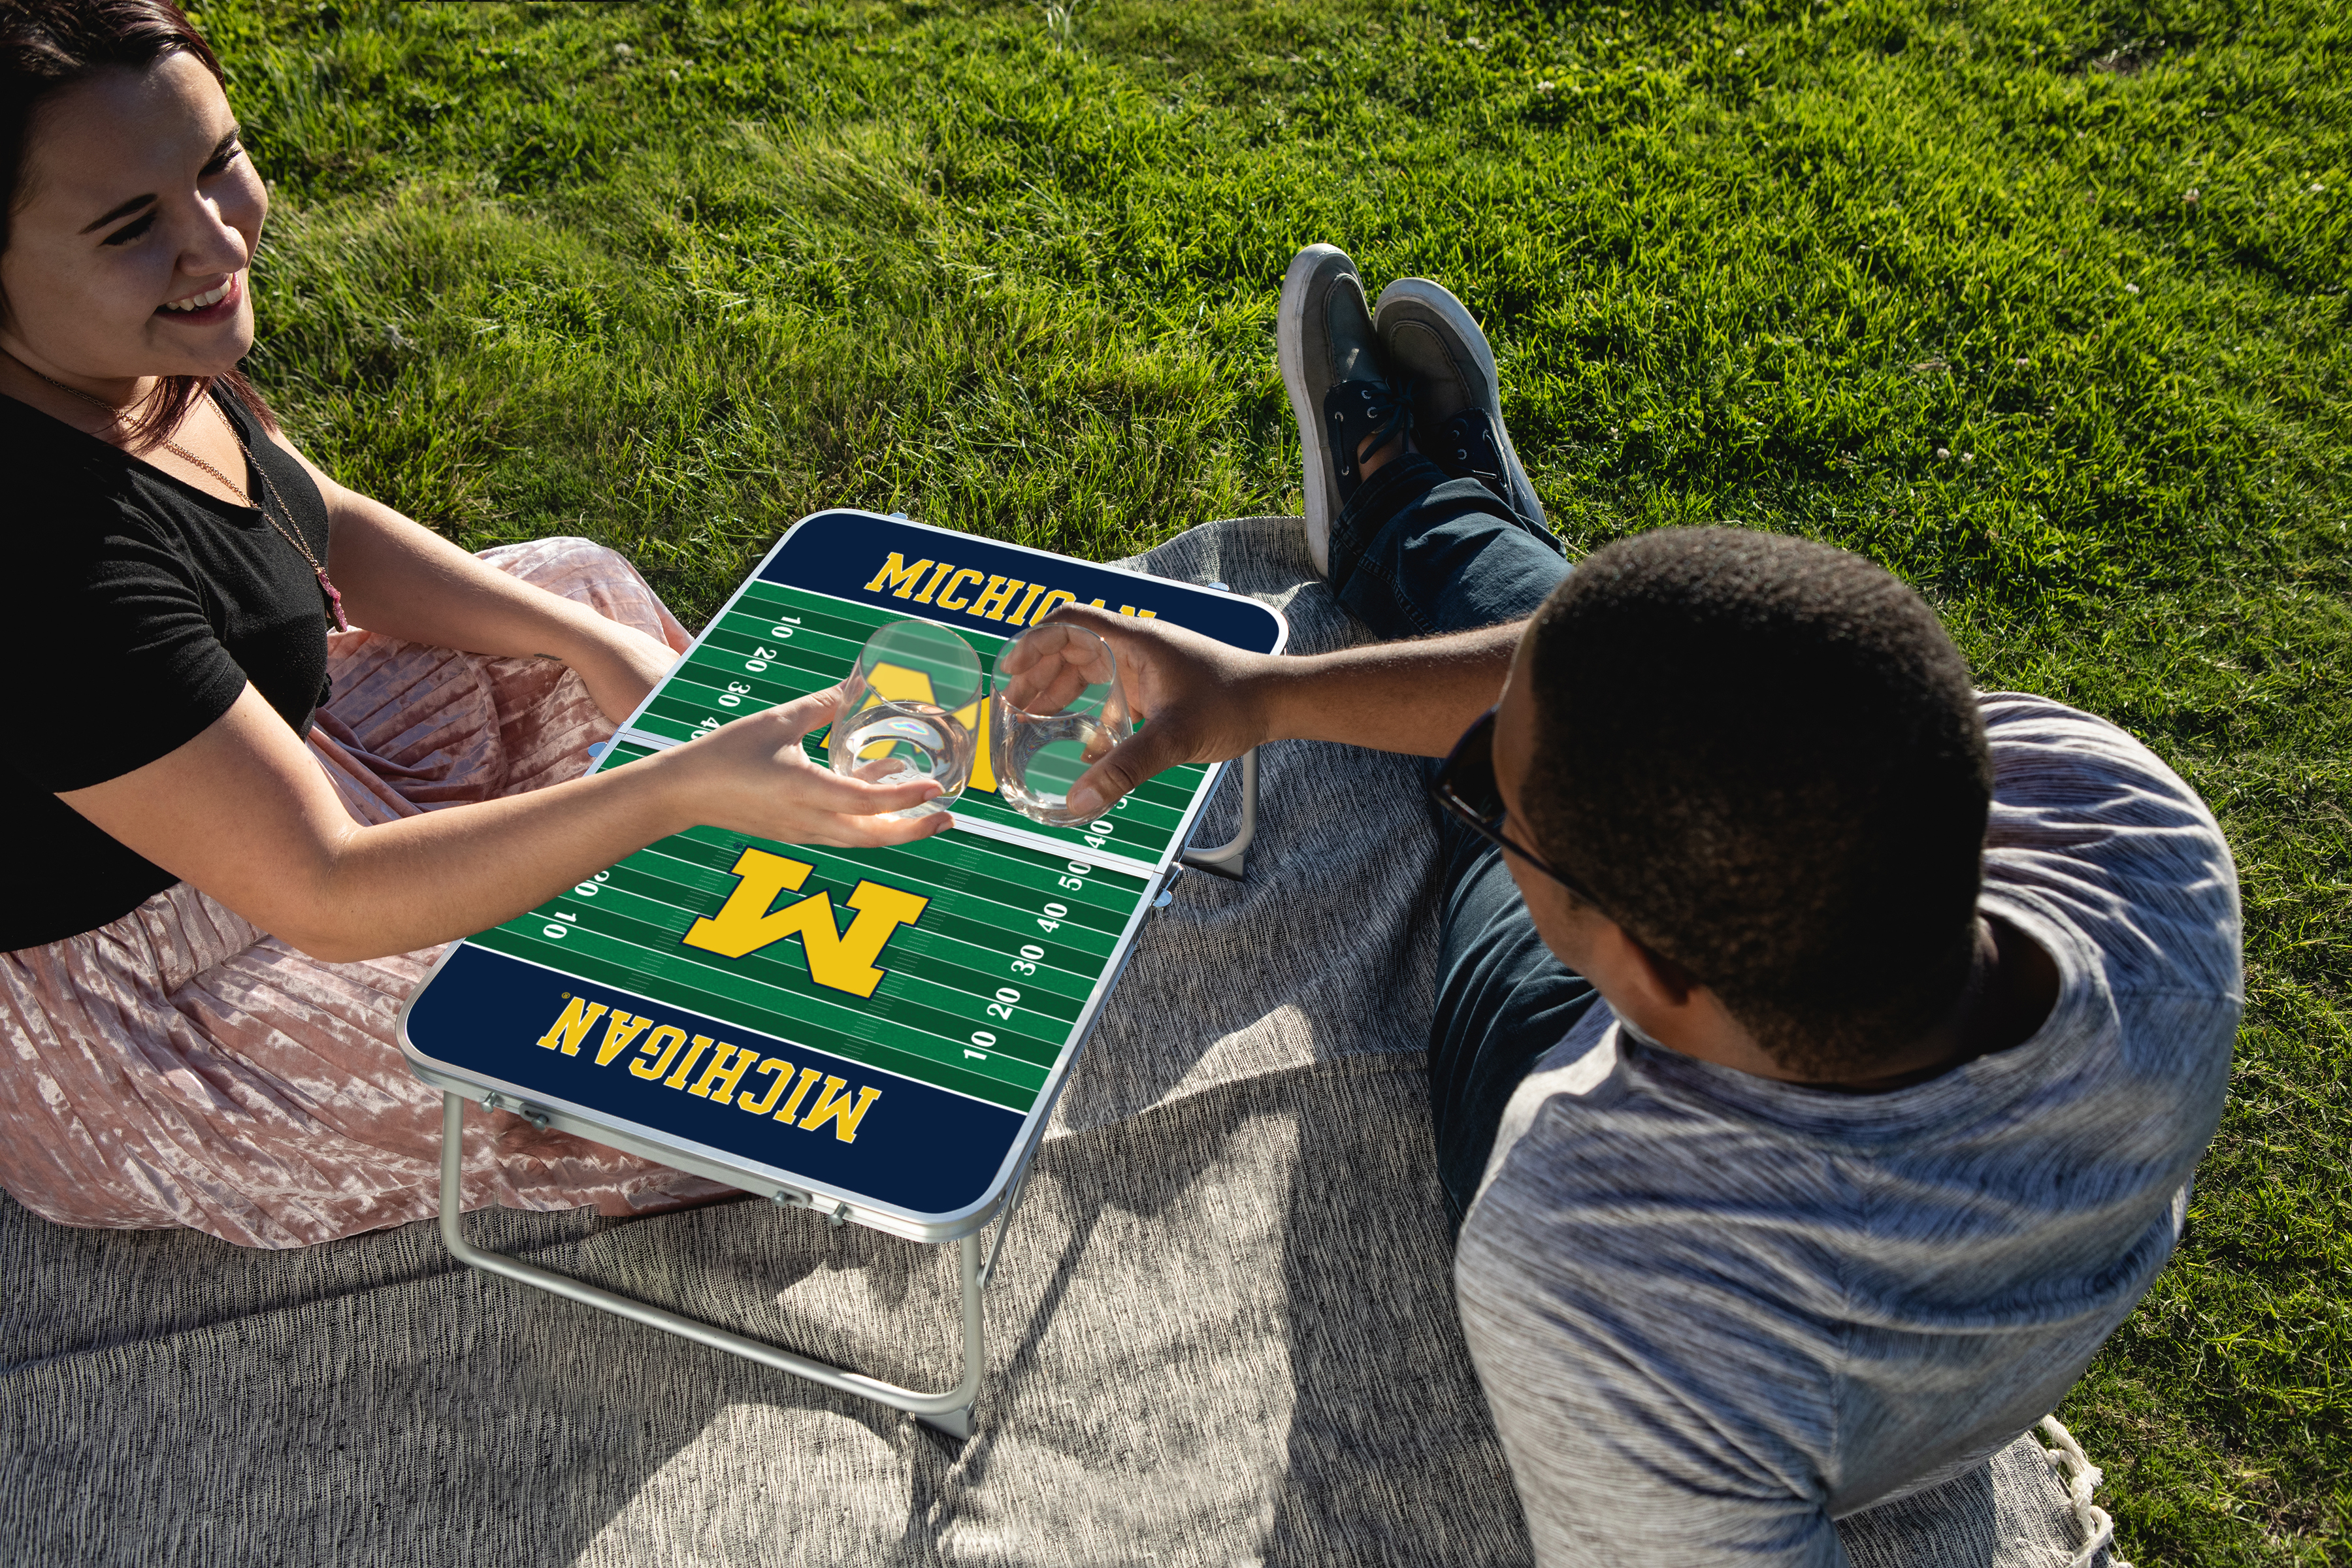 Michigan Wolverines - Concert Table Mini Portable Table